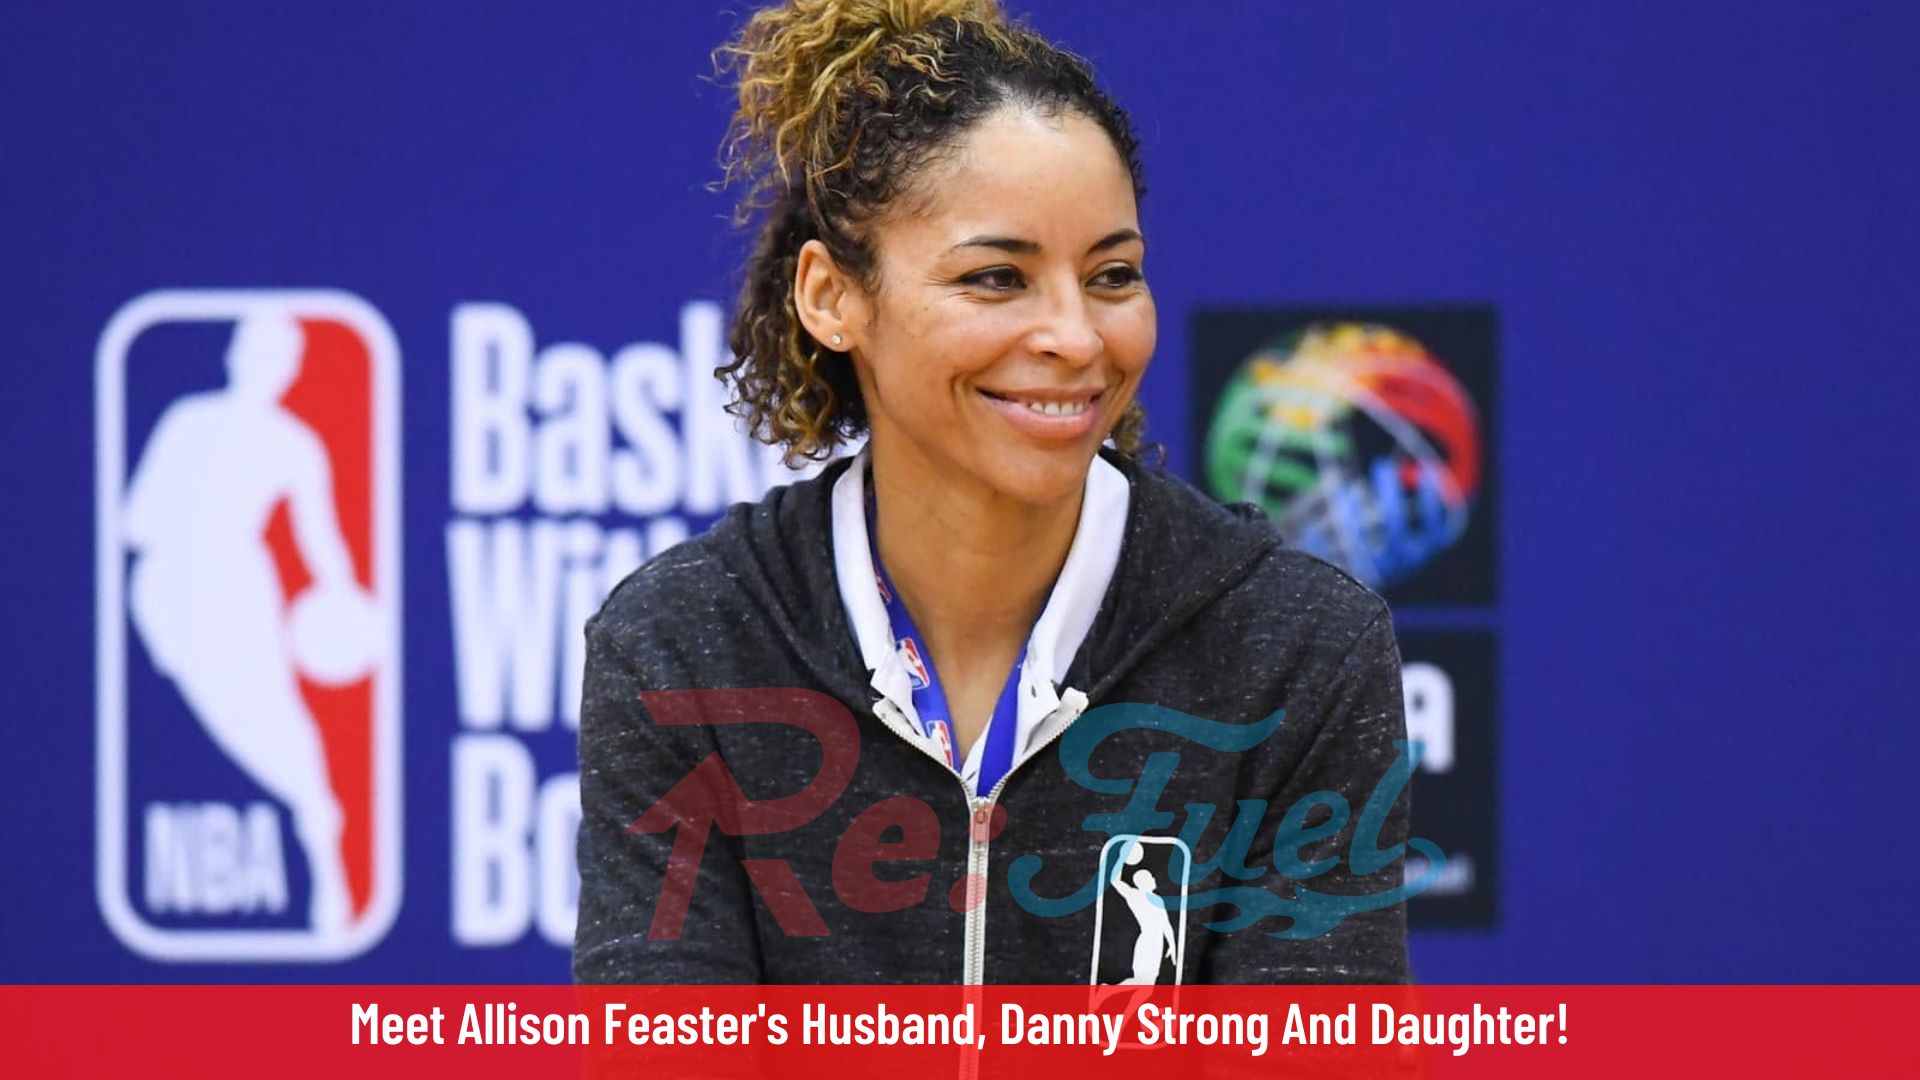 Meet Allison Feaster's Husband, Danny Strong And Daughter!